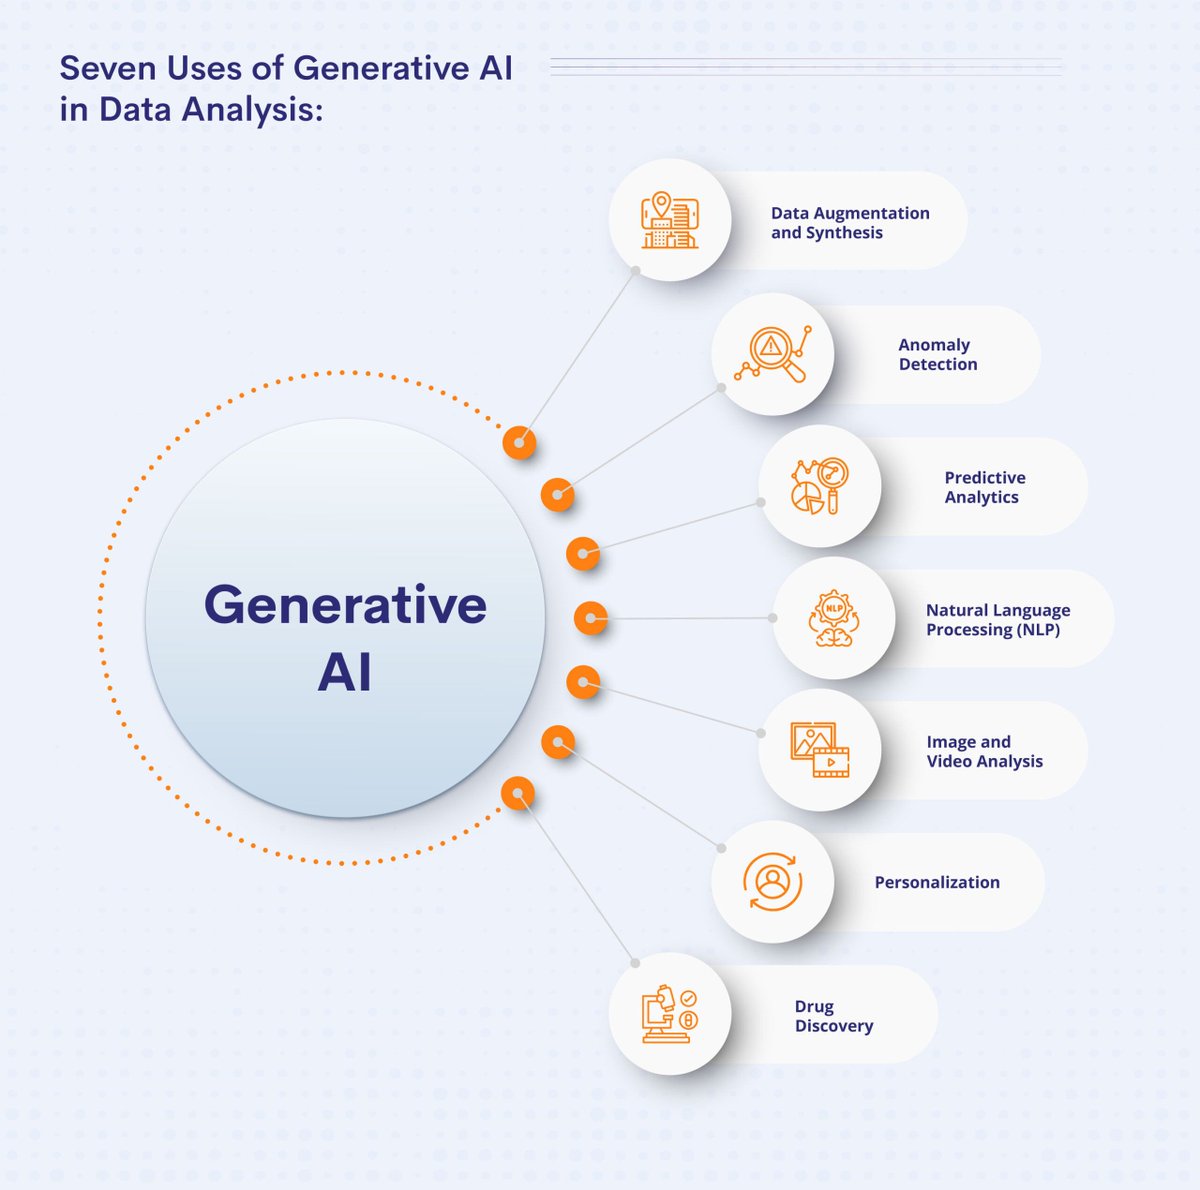 7 Generative AI use cases in data science: 

1. Data Augmentation and Synthesis 
2. Anomaly Detection
3. Predictive Analytics 
4. Natural Language Processing (NLP) 
5. Image and Video Analysis 
6. Personalization (Recommendation Systems)
7. Drug Discovery

buff.ly/3UqqXhy